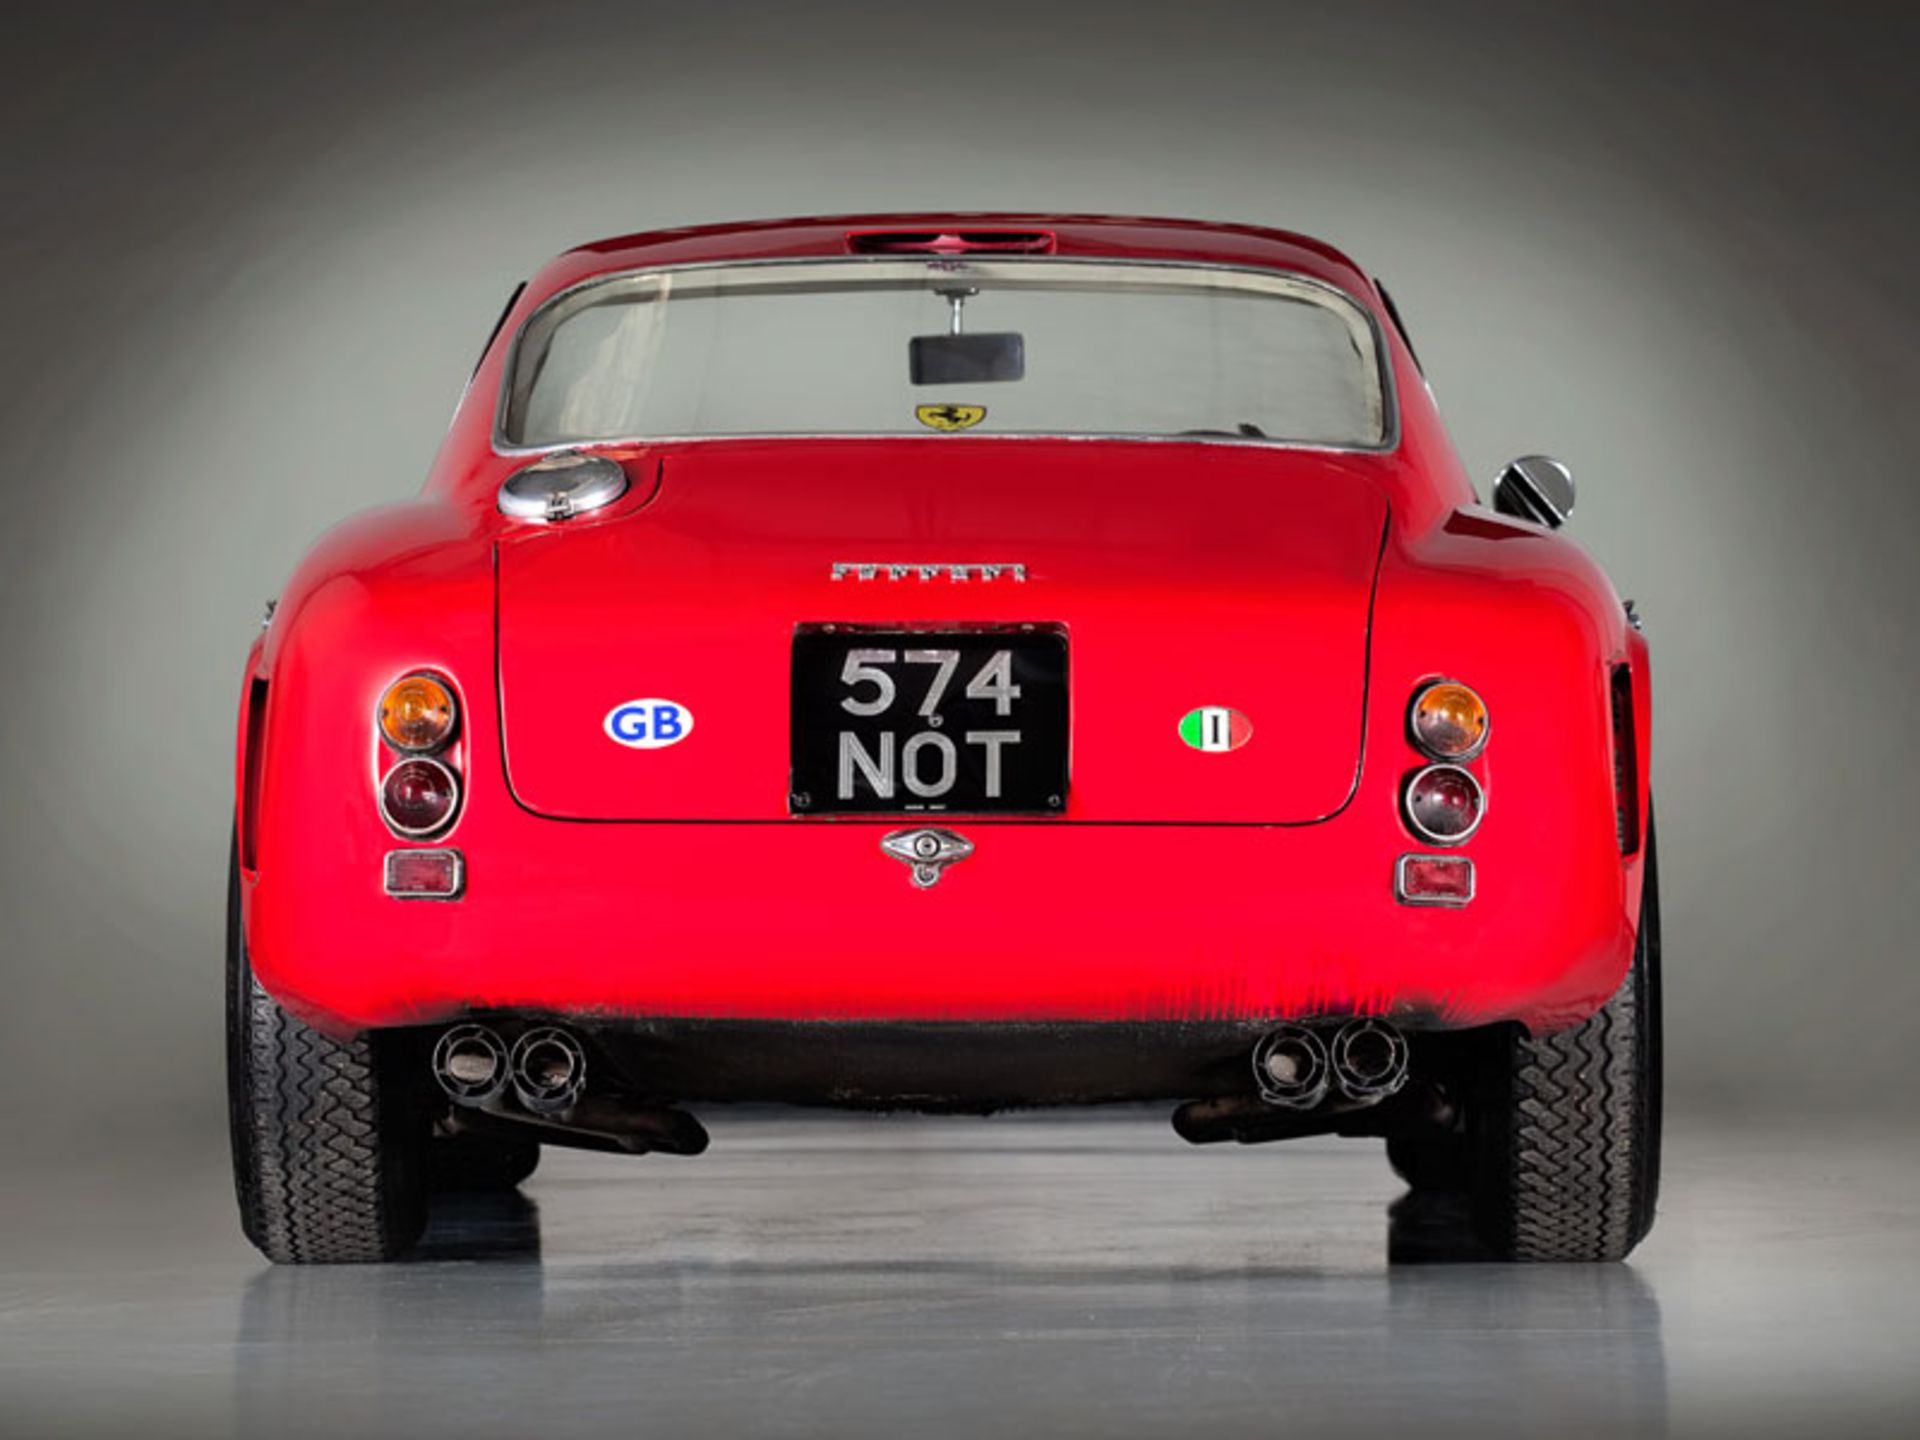 Registering to Bid on the Ferrari 250 GT SWB from the Richard Colton Collection:
- All - Image 3 of 10